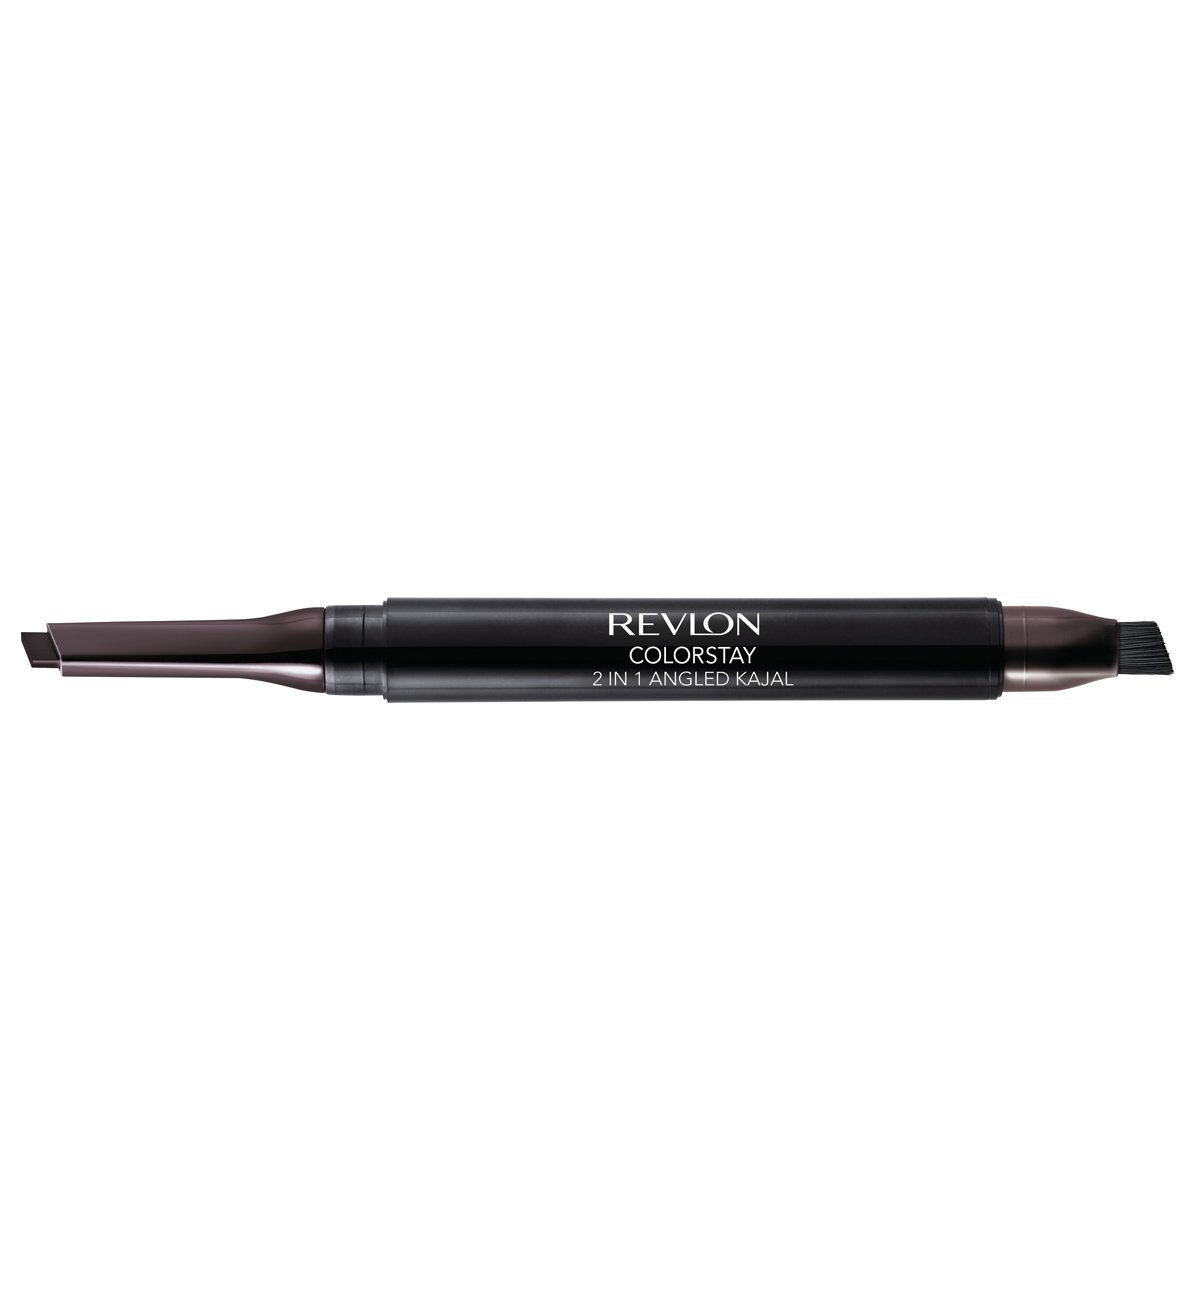 Image of Revlon Colorstay 2 In 1 Kayal Figue 102